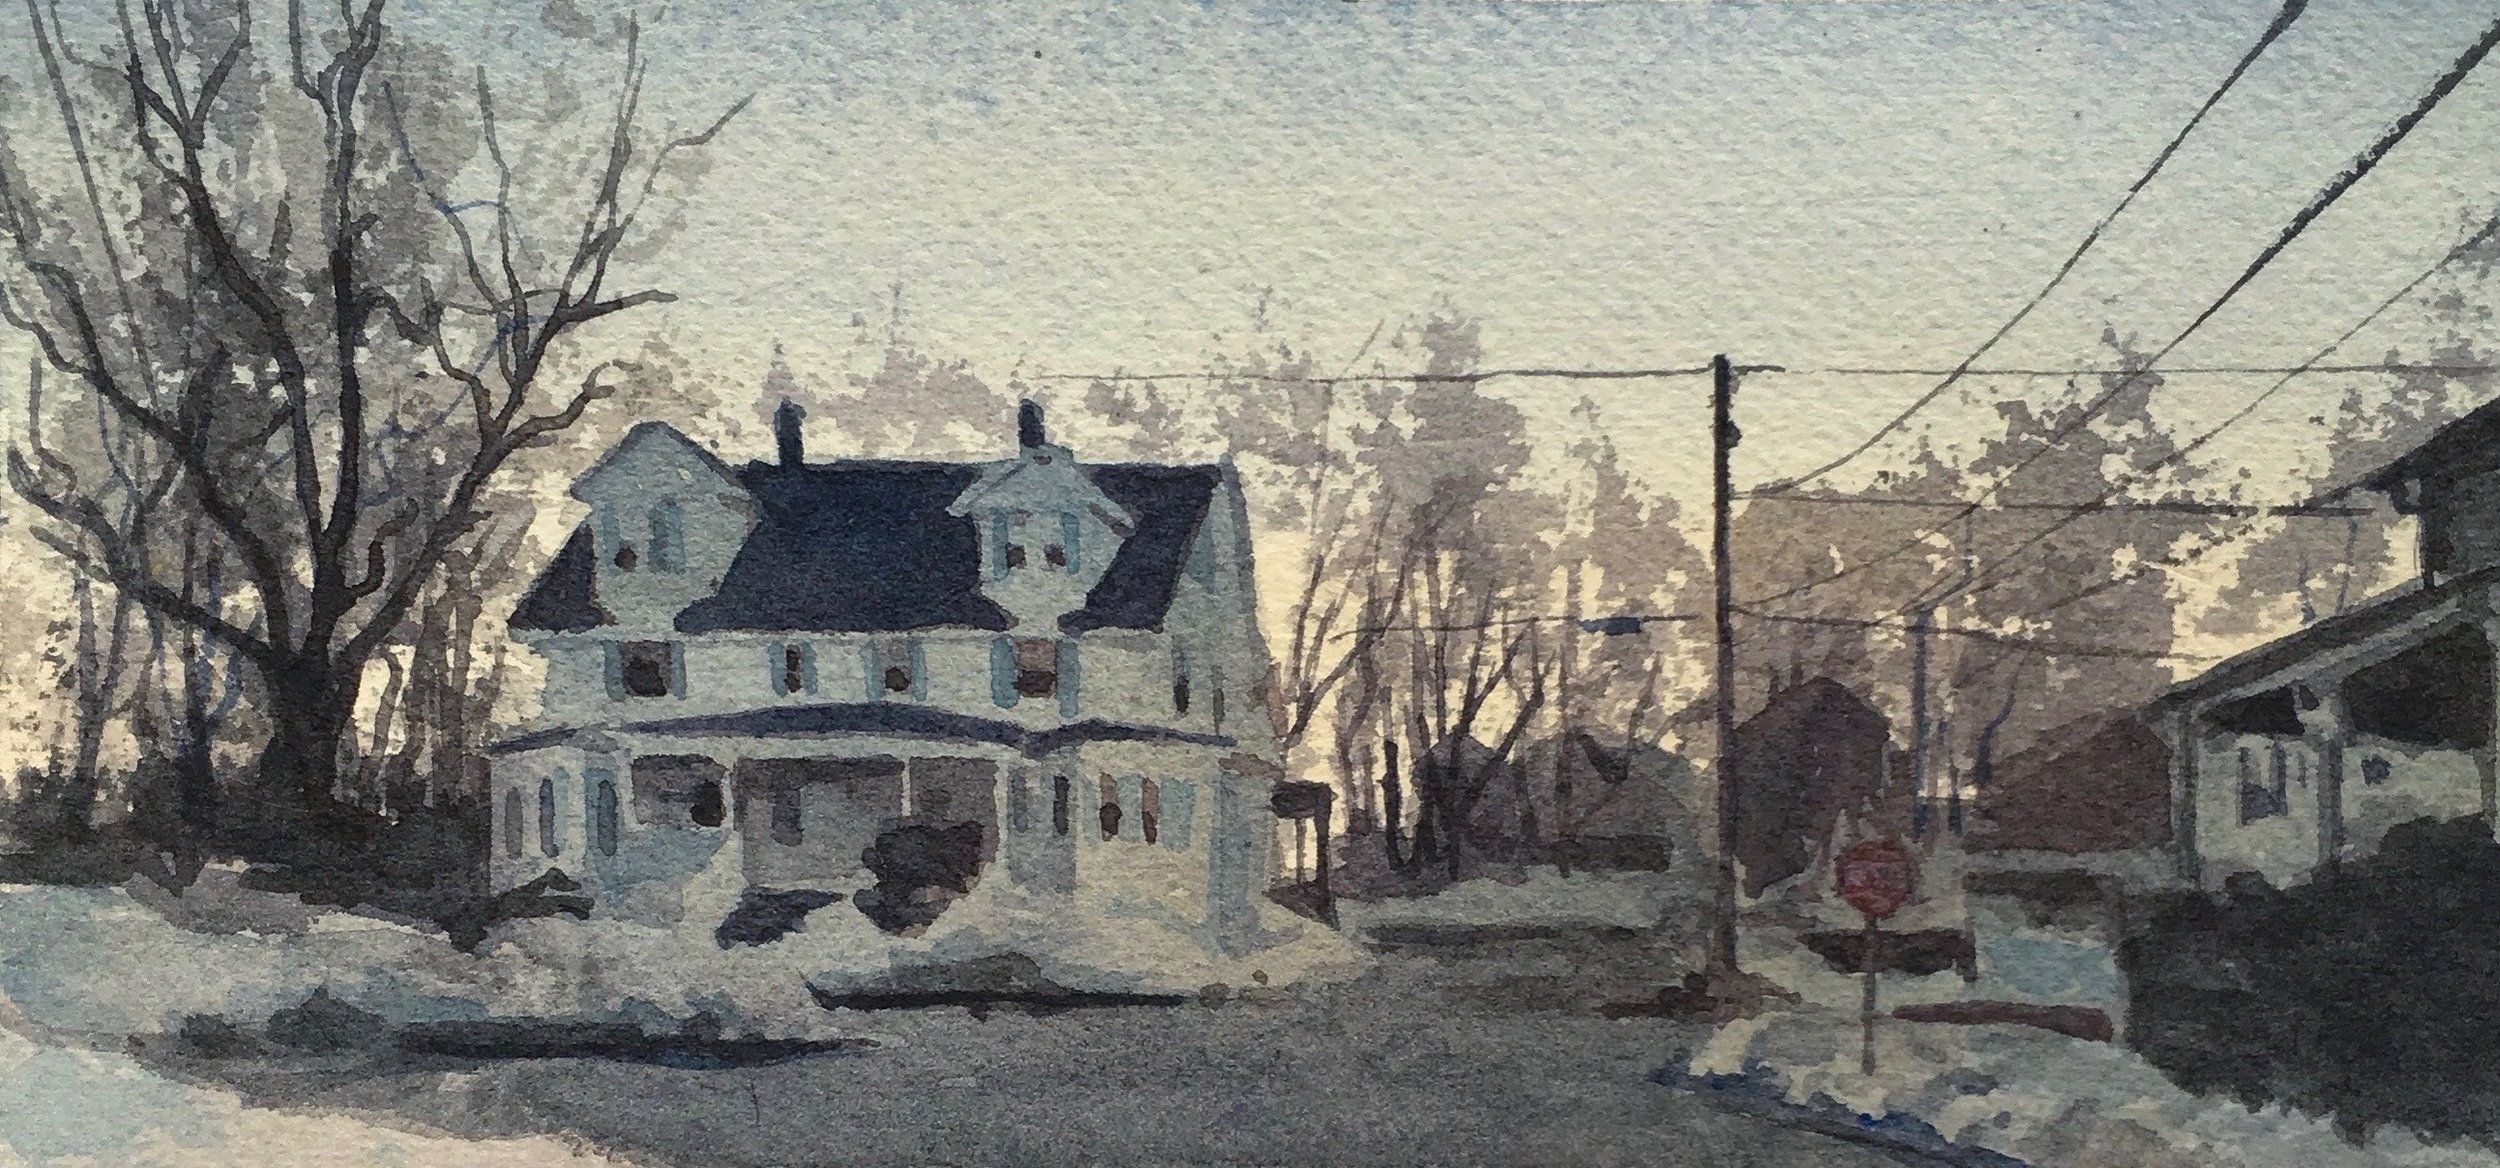 East Concord, watercolor, 4"x8", 2018